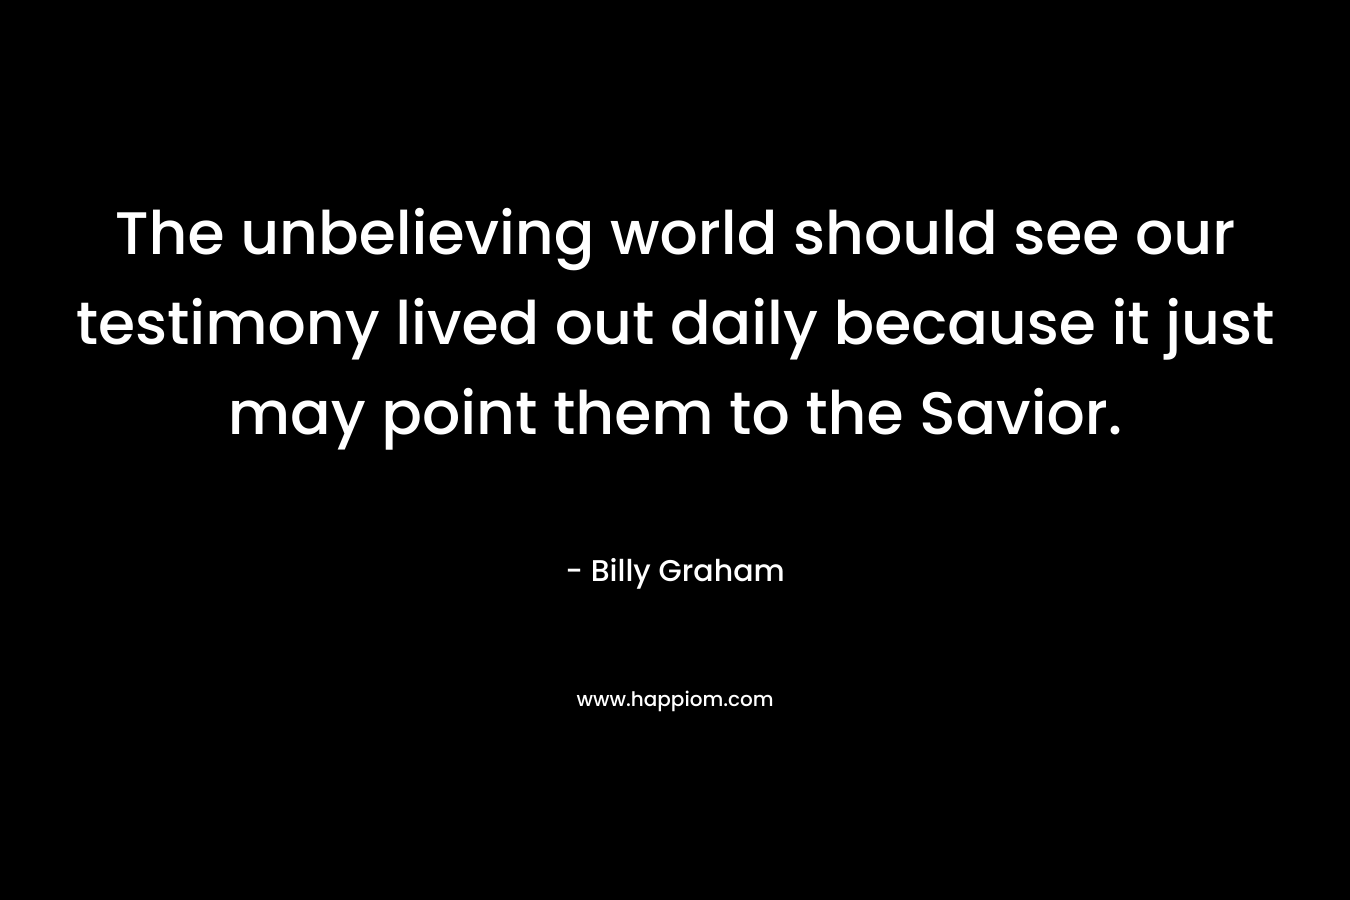 The unbelieving world should see our testimony lived out daily because it just may point them to the Savior. – Billy Graham